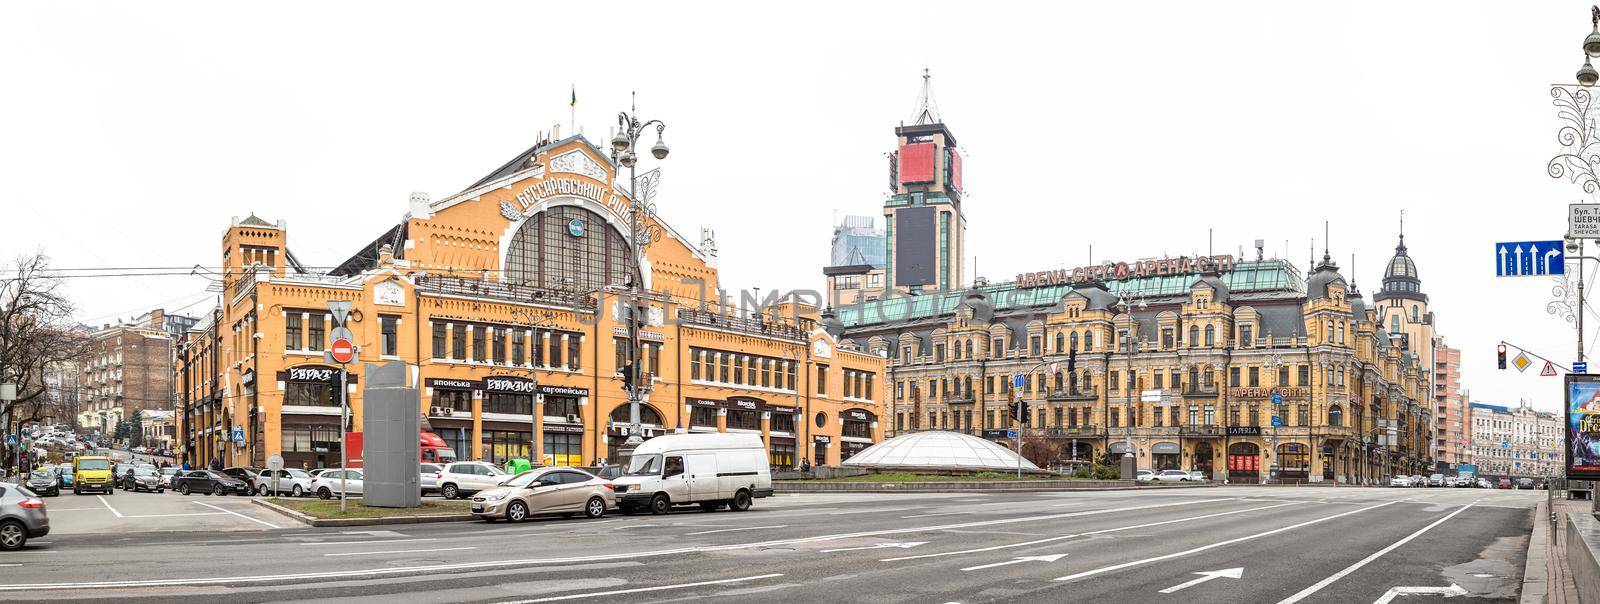 Kyiv, Ukraine - Nov. 16, 2019: The streets of Kyiv. Old and new architecture of Kyiv. Panorama view of the Bessarabian market and the Аrena Citi shopping complex.